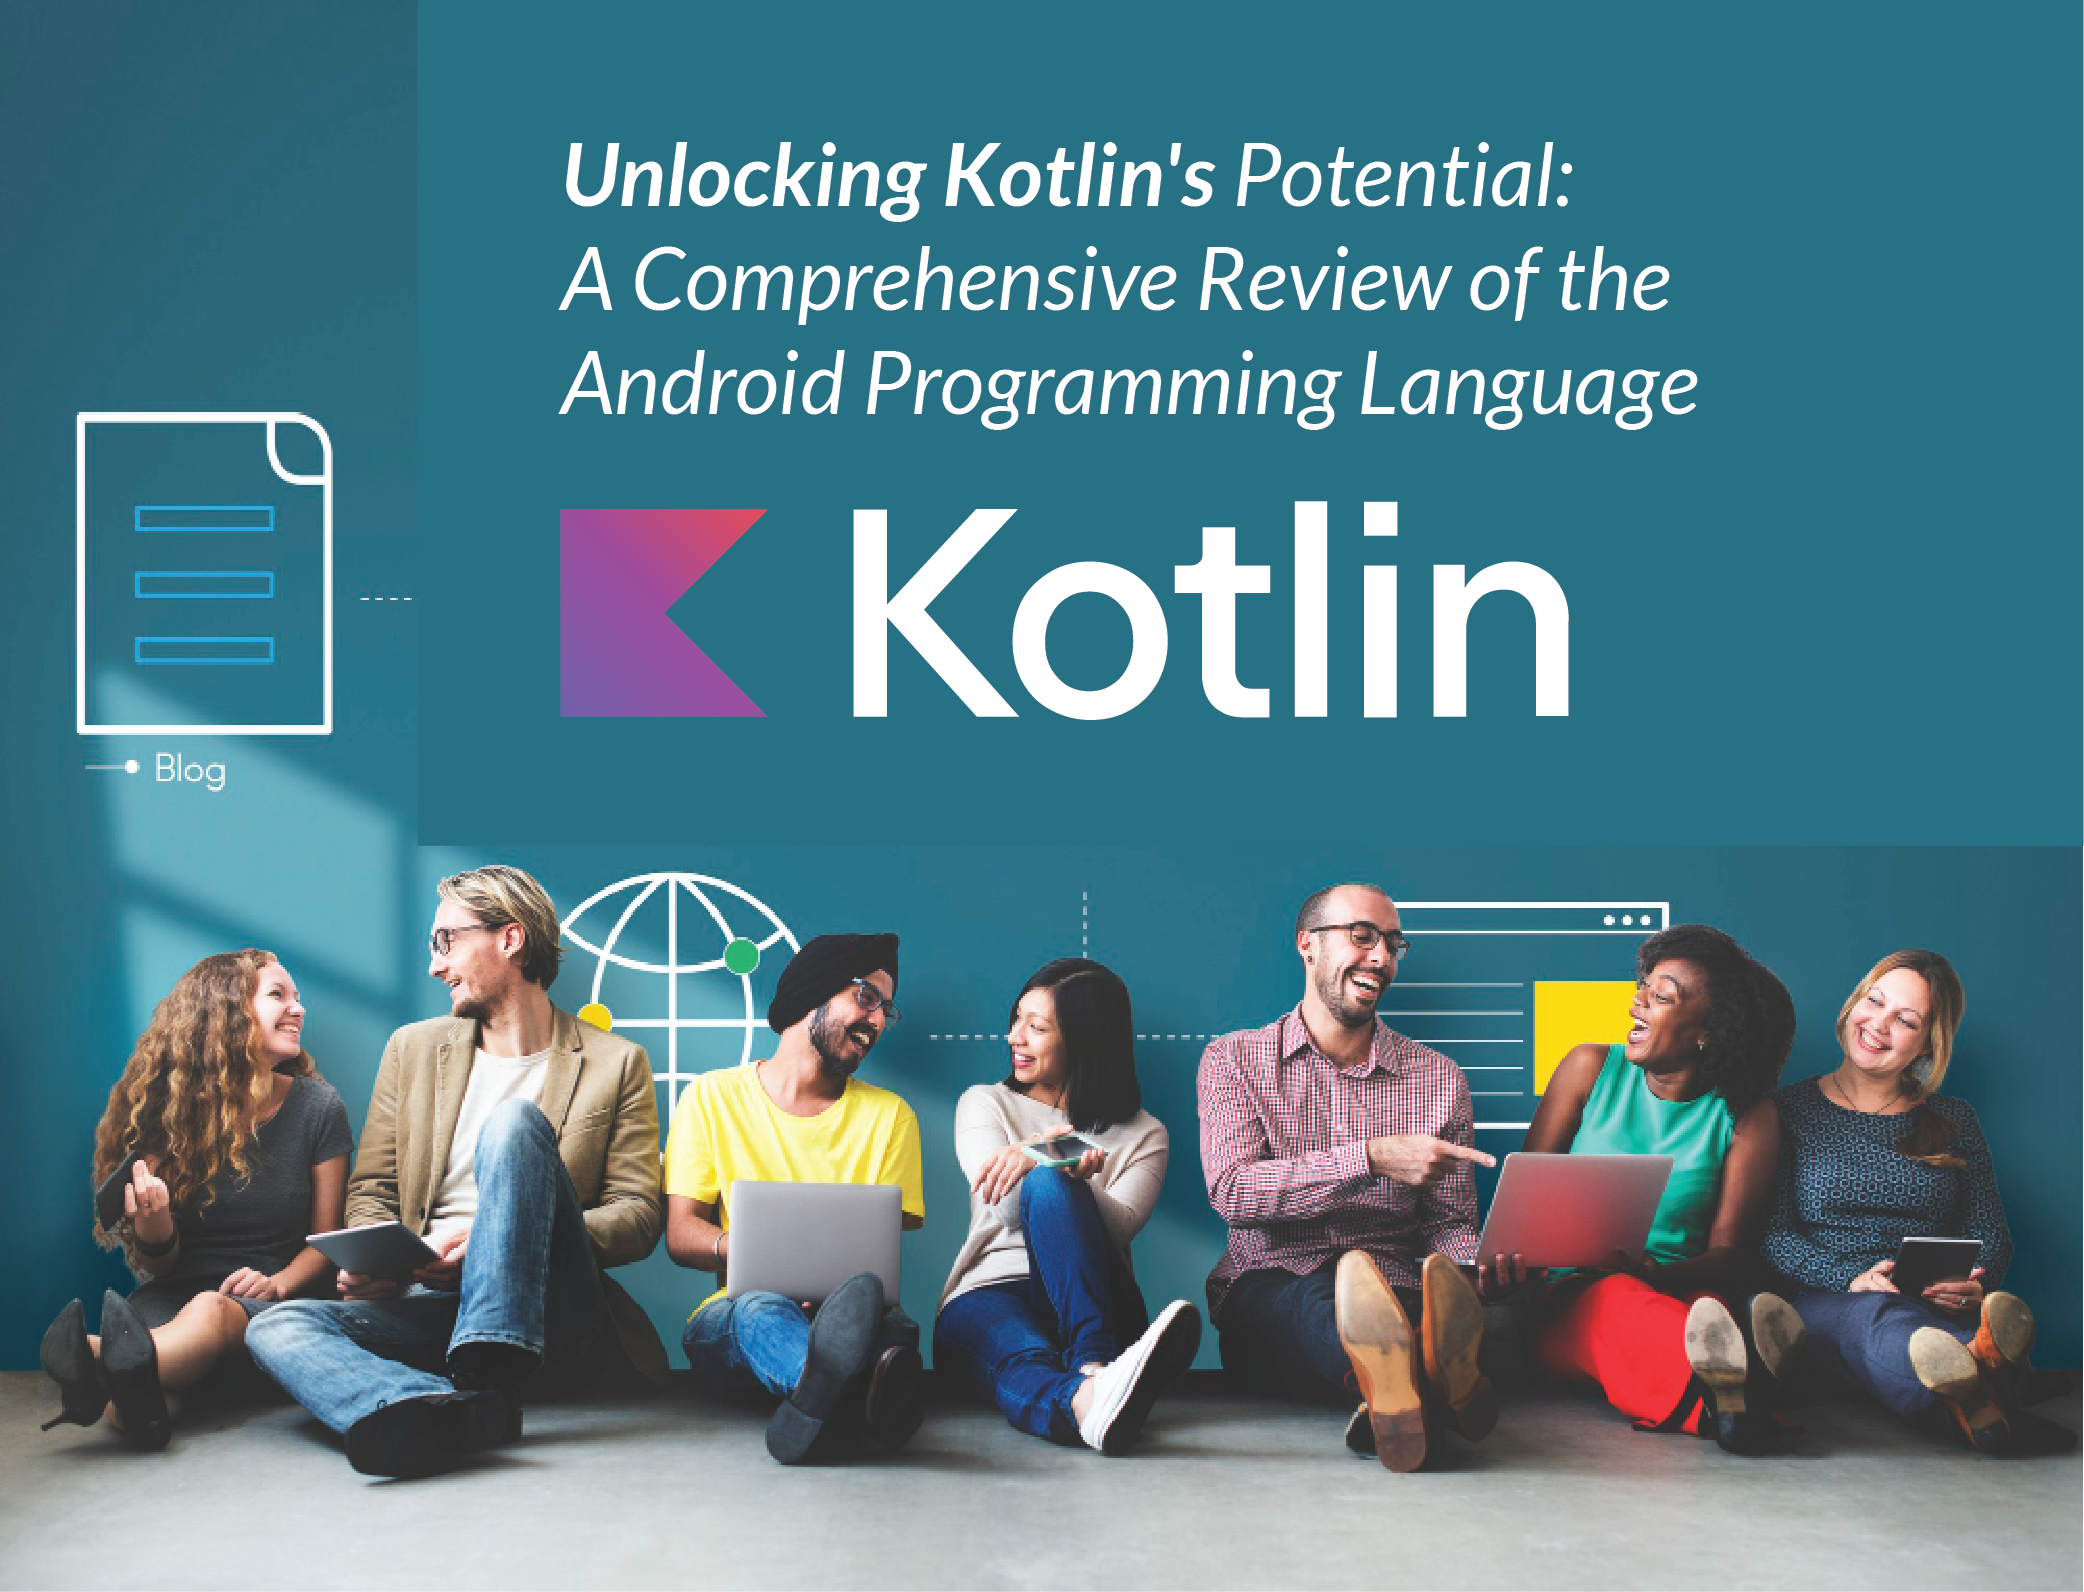 Unlocking Kotlin’s Potential: A Comprehensive Review of the Android Programming Language